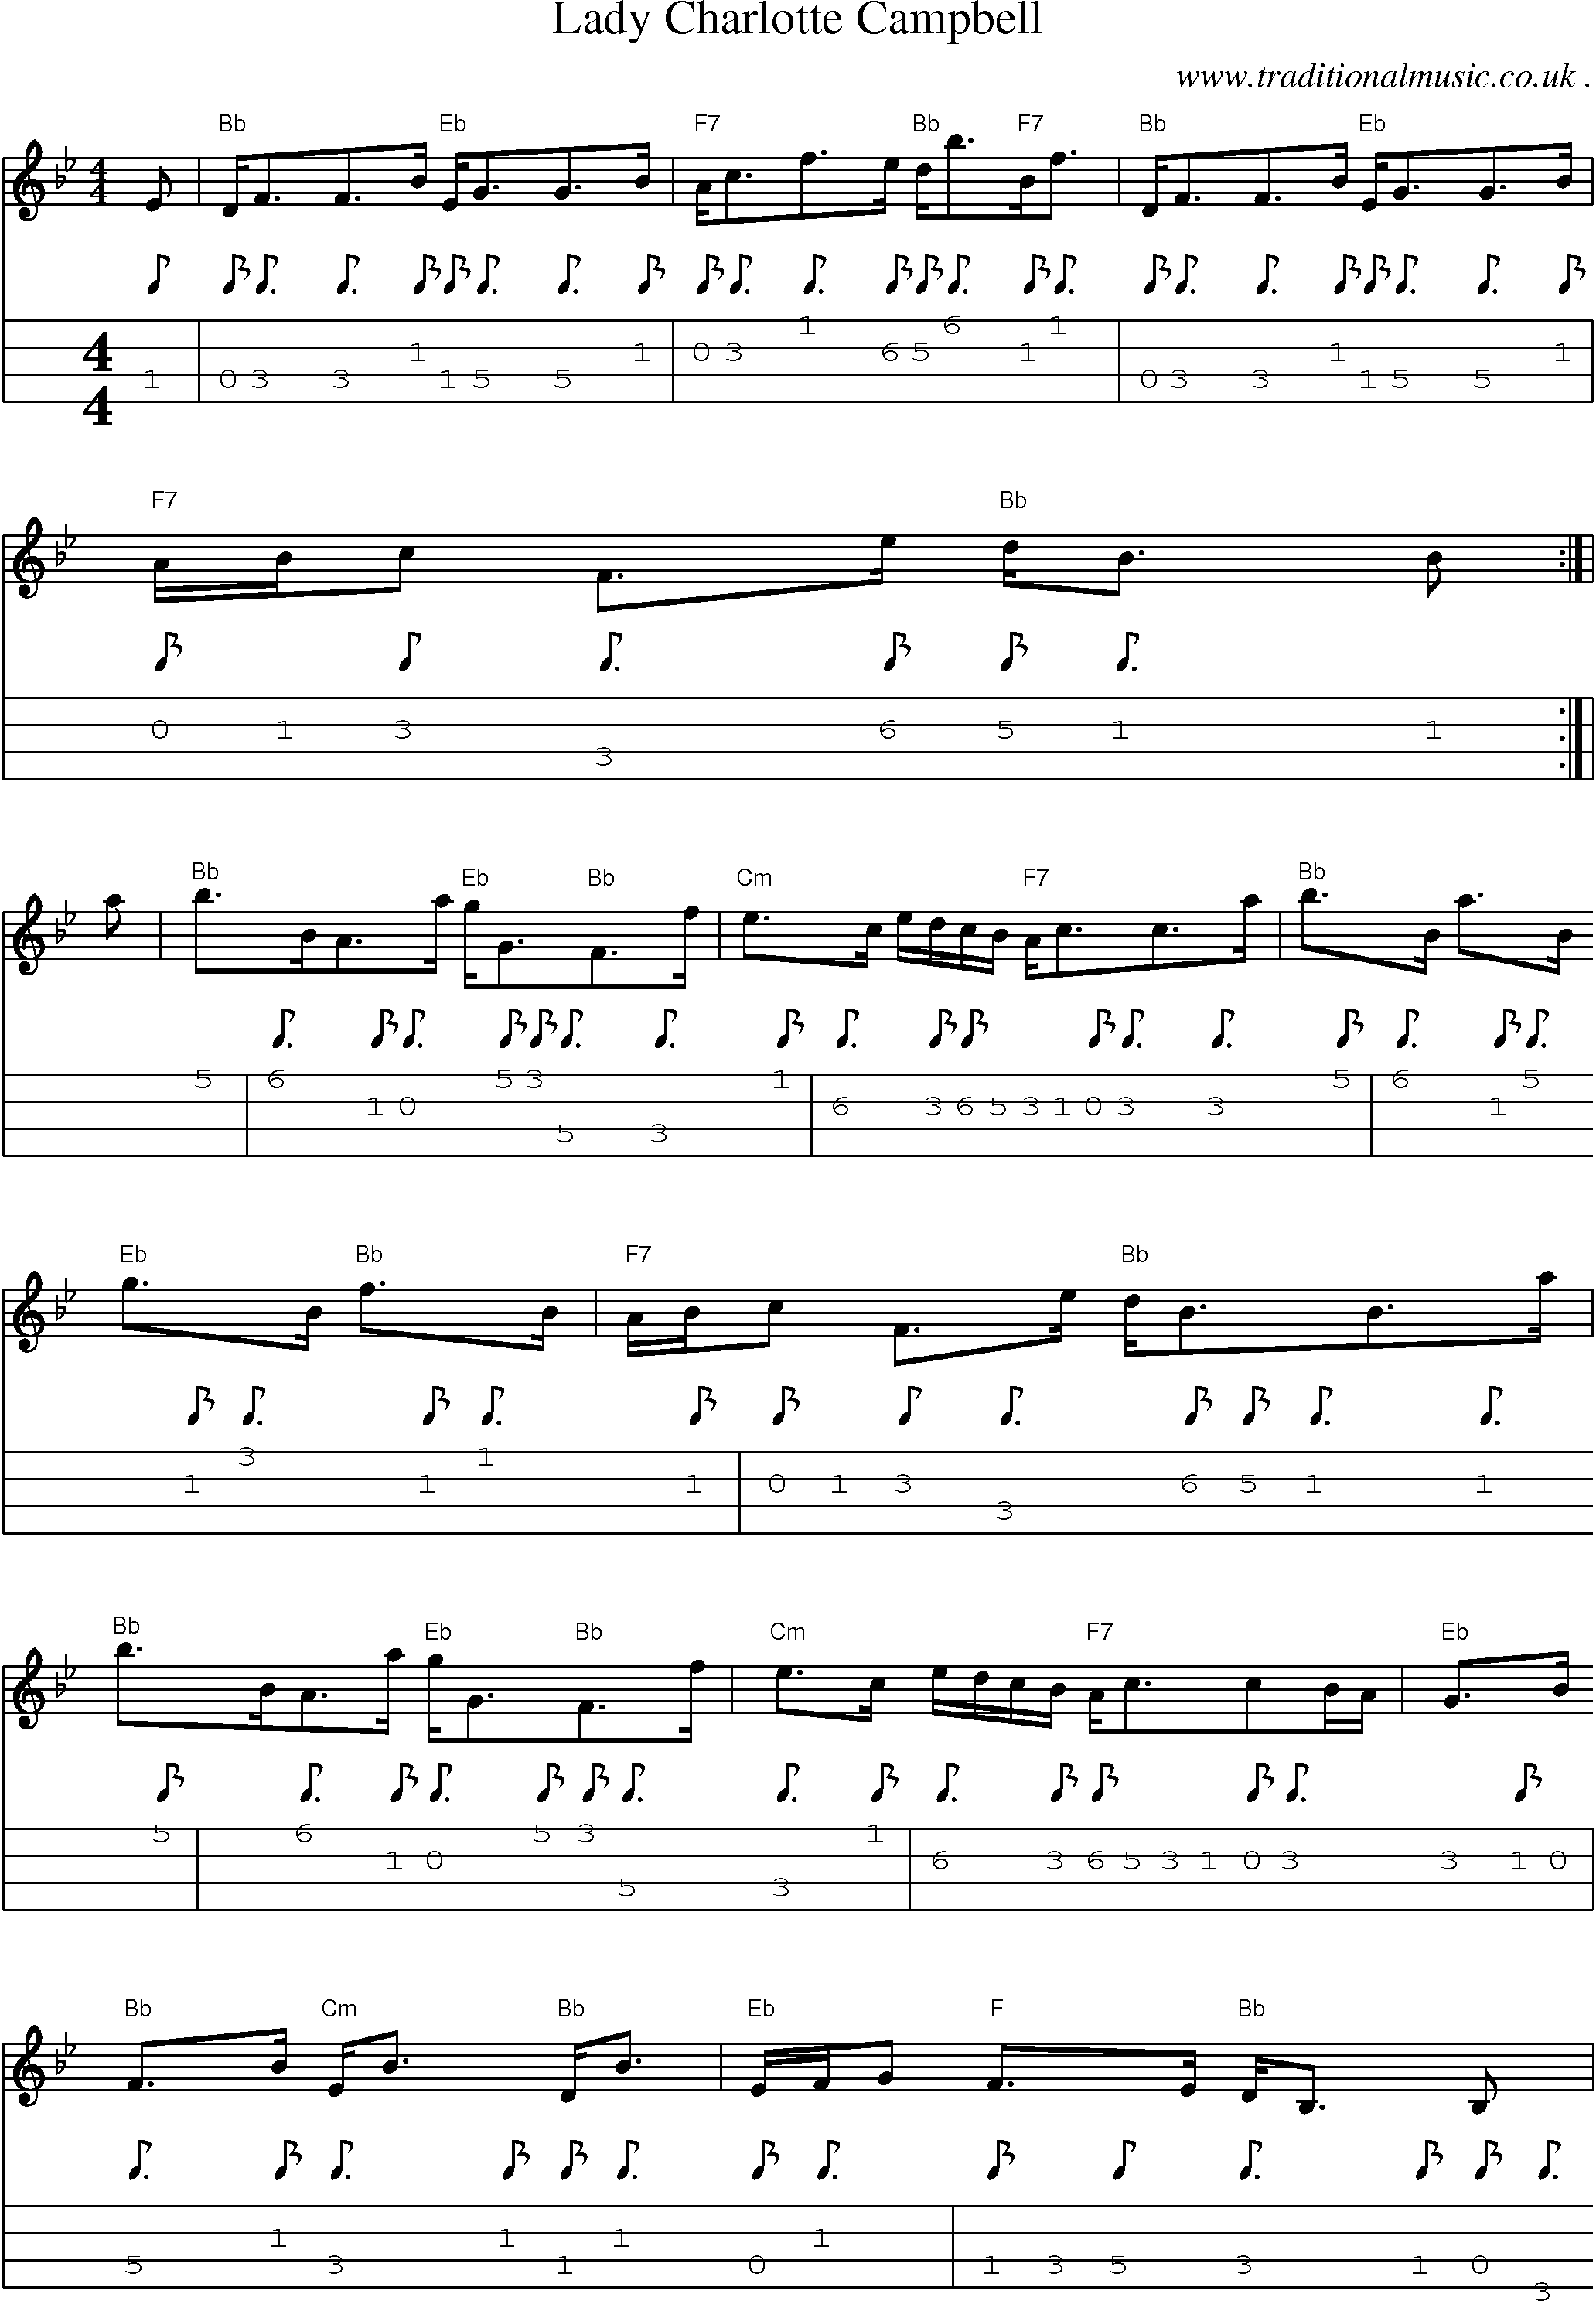 Sheet-music  score, Chords and Mandolin Tabs for Lady Charlotte Campbell